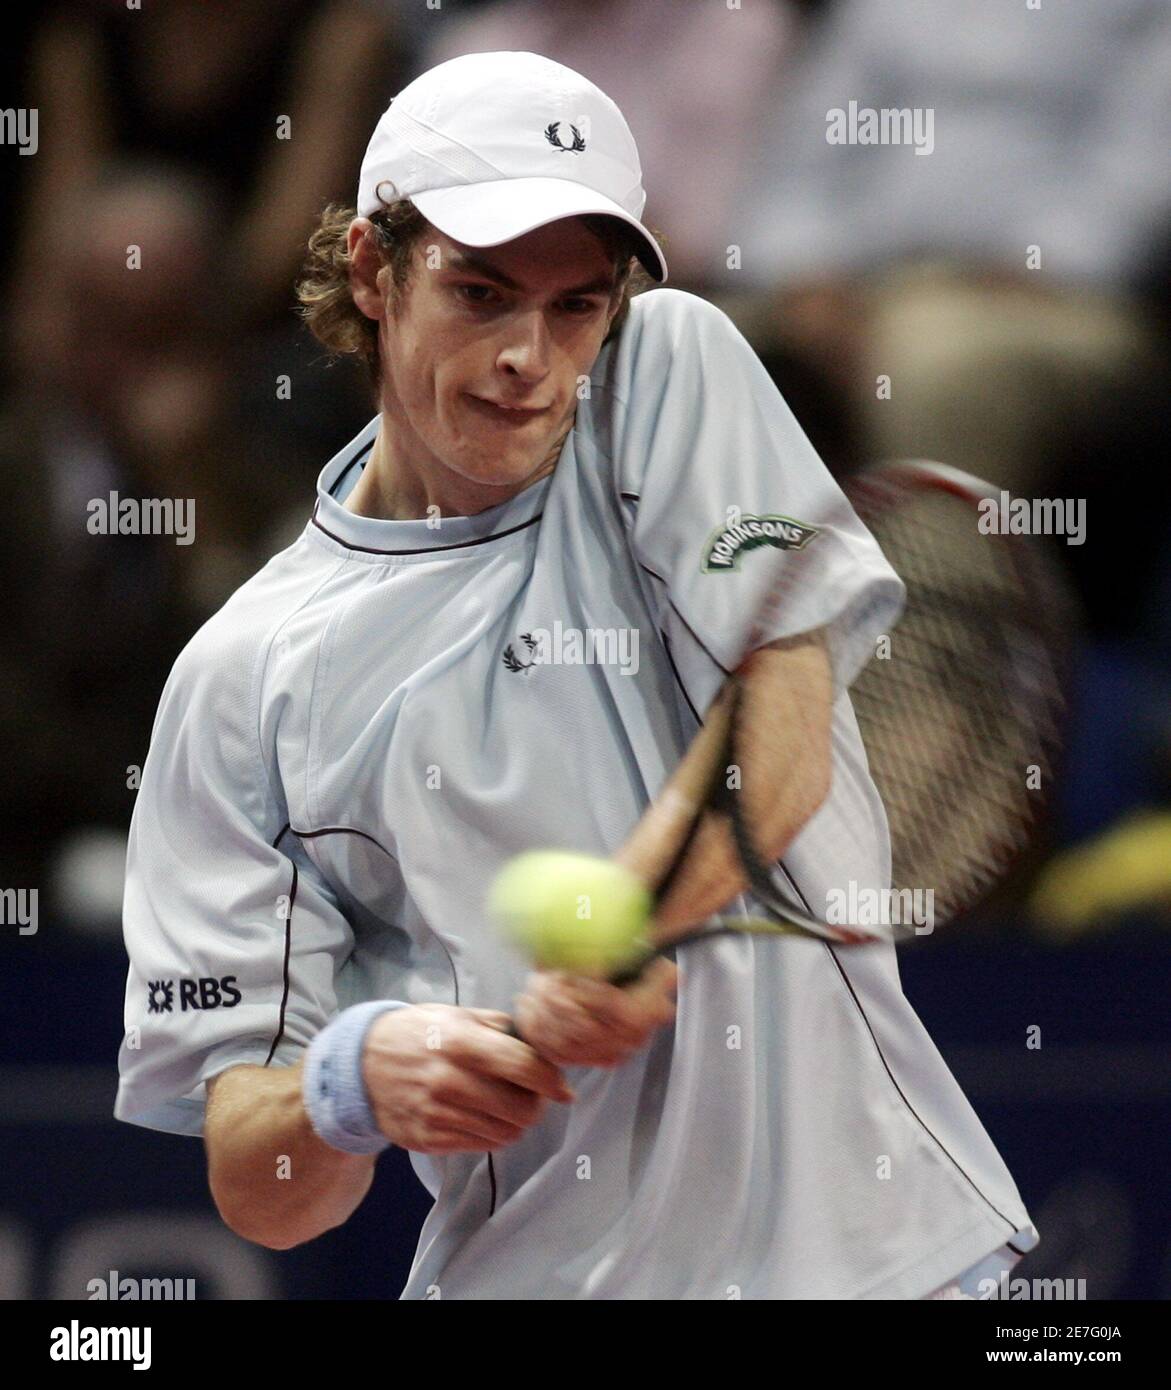 Britain's Andy Murray returns a backhand to compatriot Tim Henman during  their first round match at the Swiss Indoors in Basel, Switzerland, October  26, 2005. REUTERS/Siggi Bucher Photo Stock - Alamy